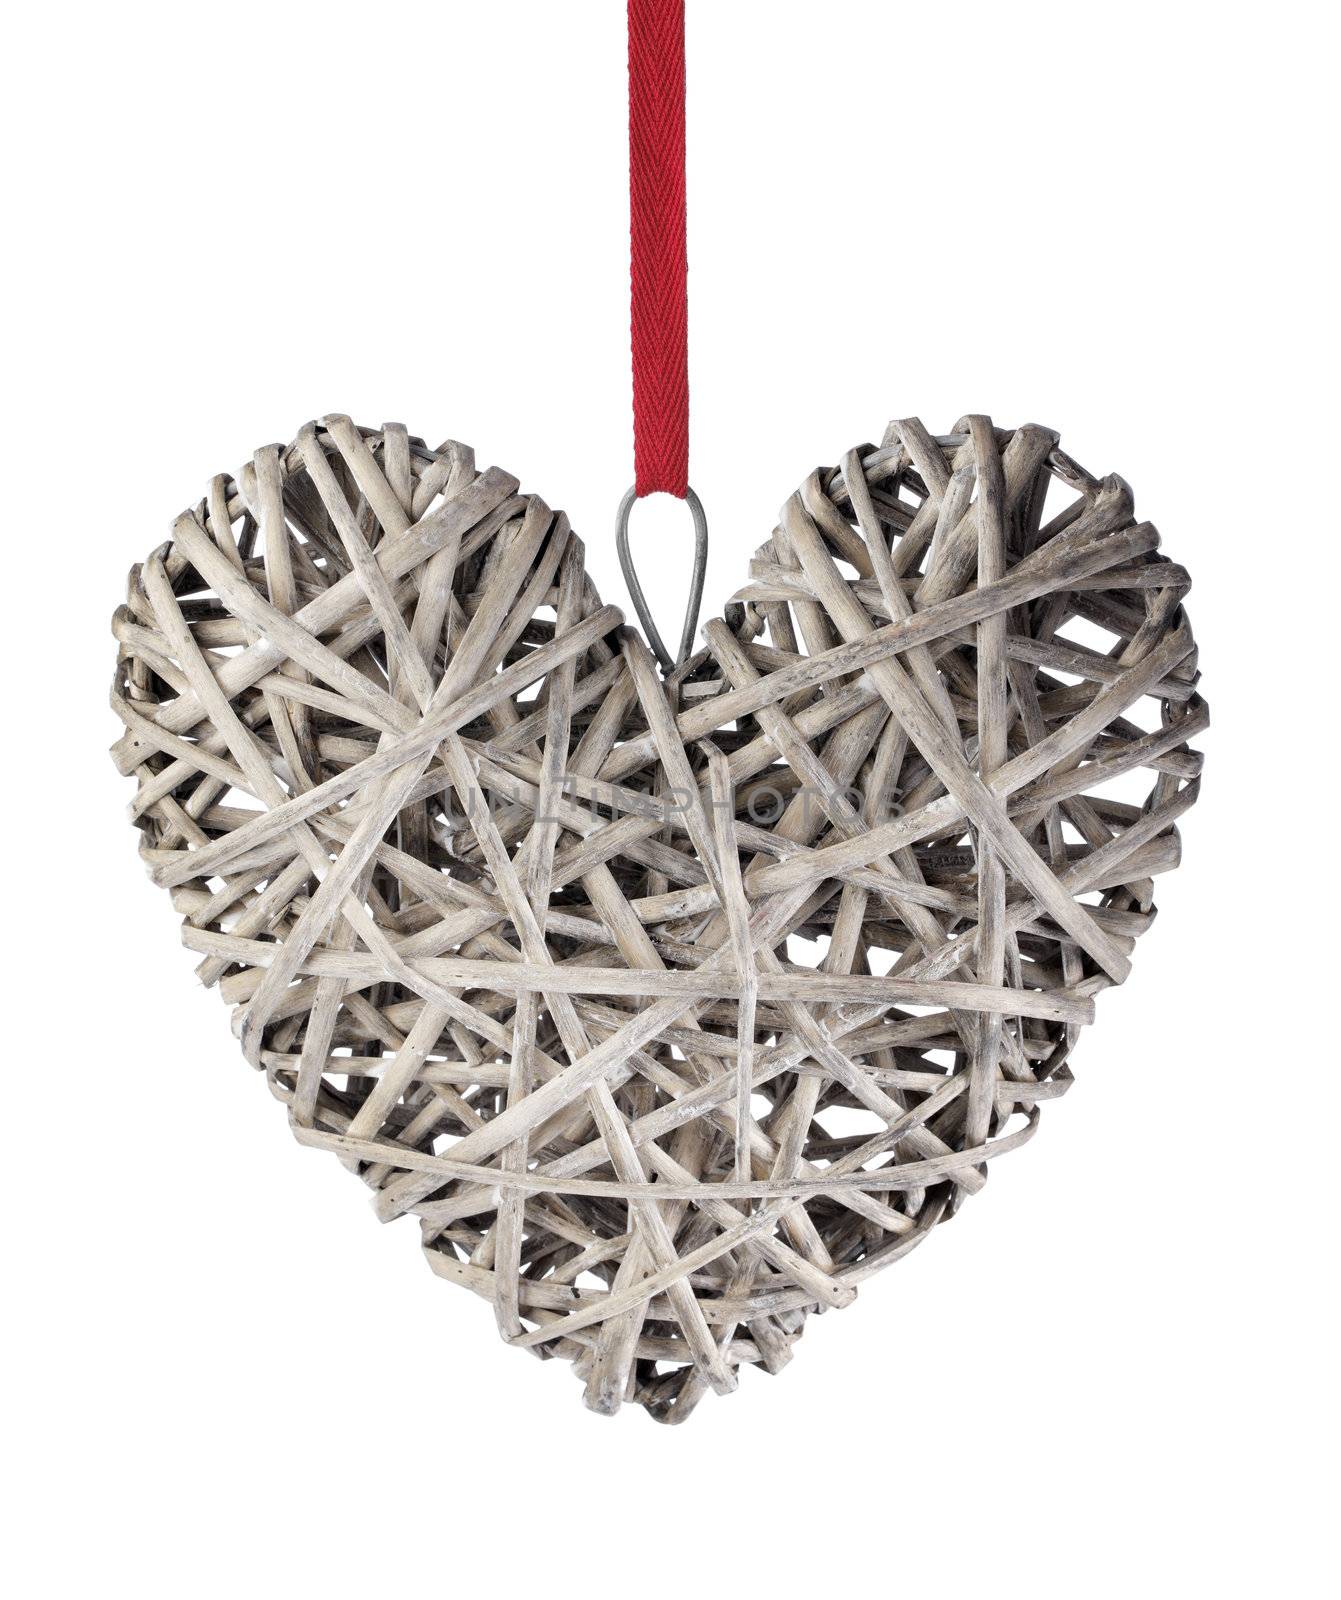 Heart shaped decoration made of wood